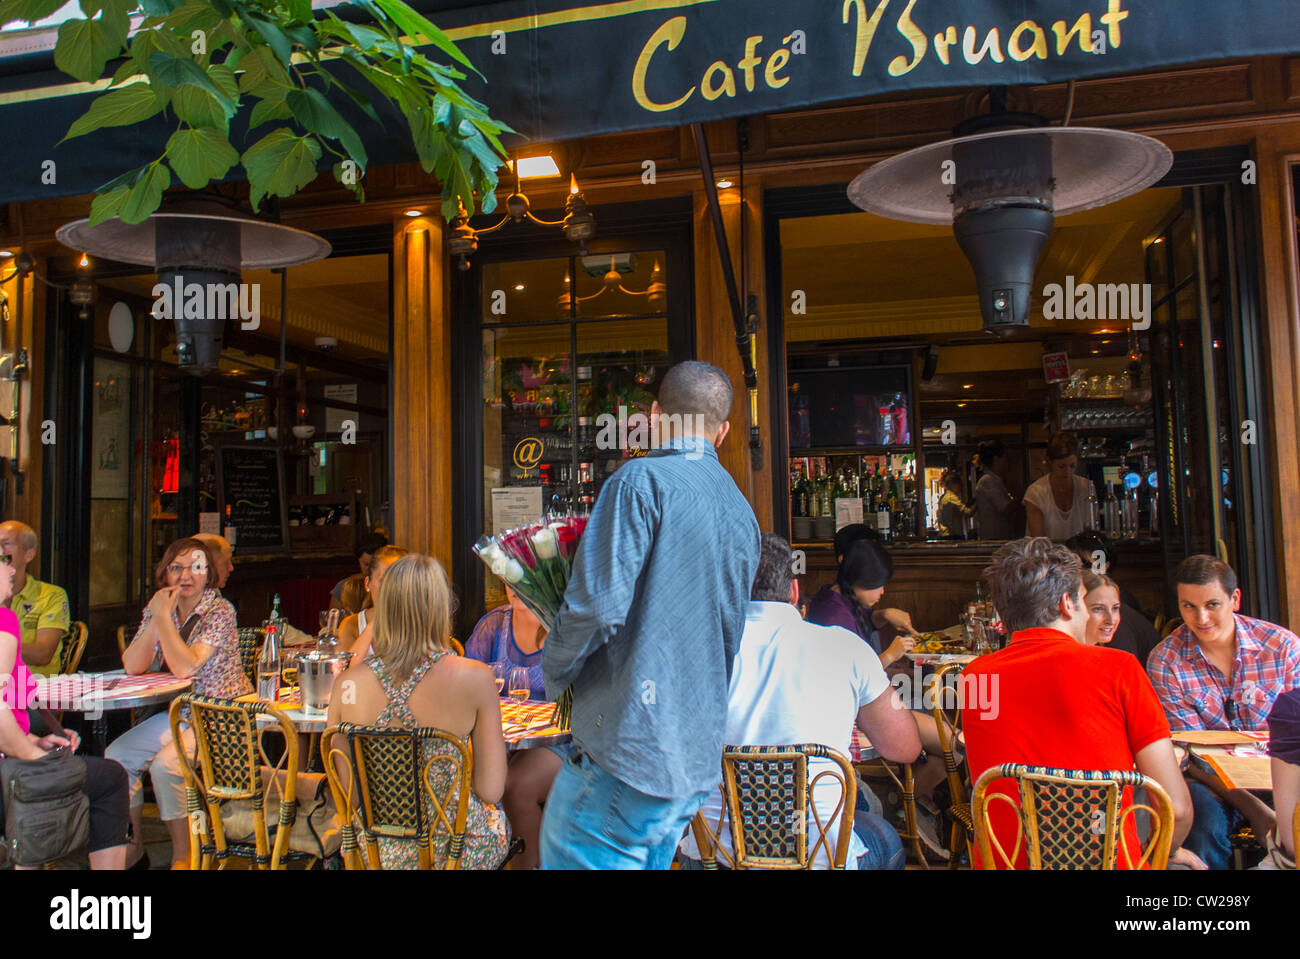 Paris, France, People Sharing Drinks in Abesses Montmartre Area, French Bistro, 'Café Bruant' Restaurant Terrace, french cafe exterior Stock Photo